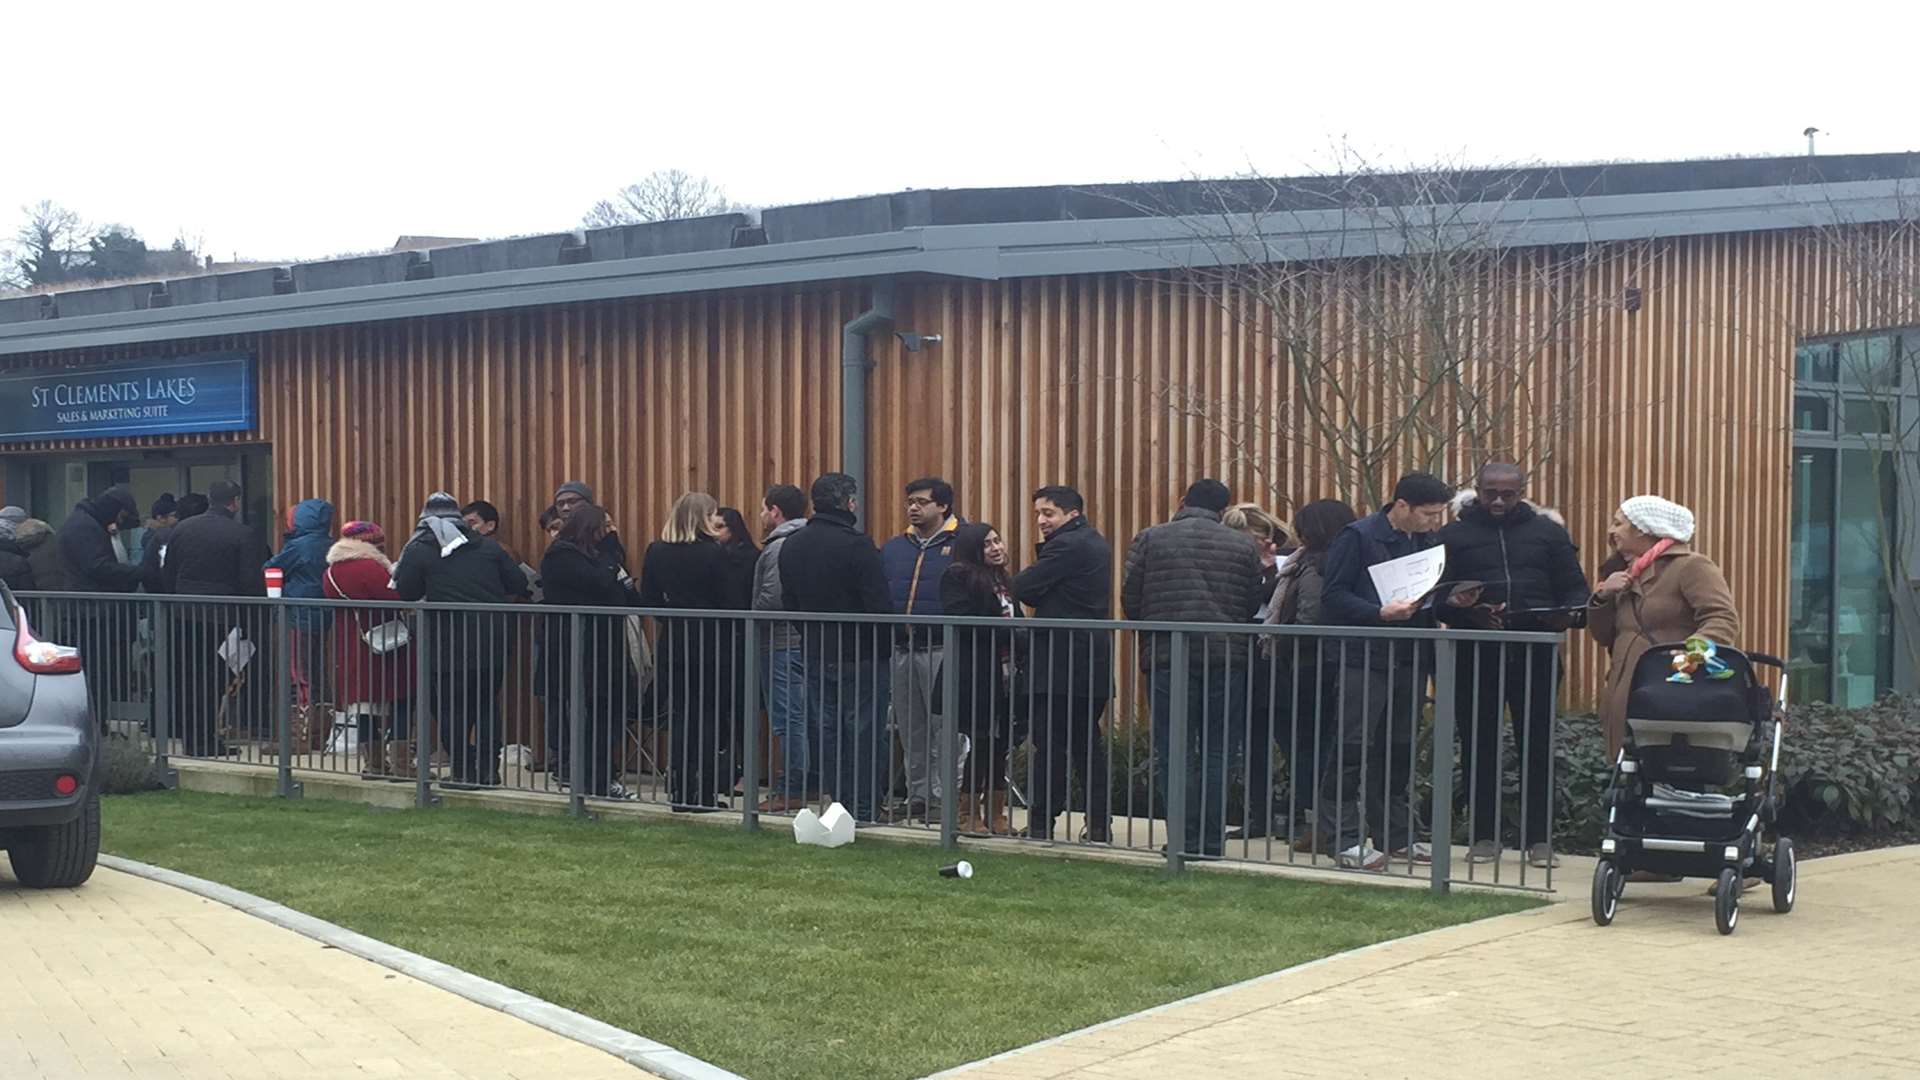 People queuing for homes at St Clements Lakes